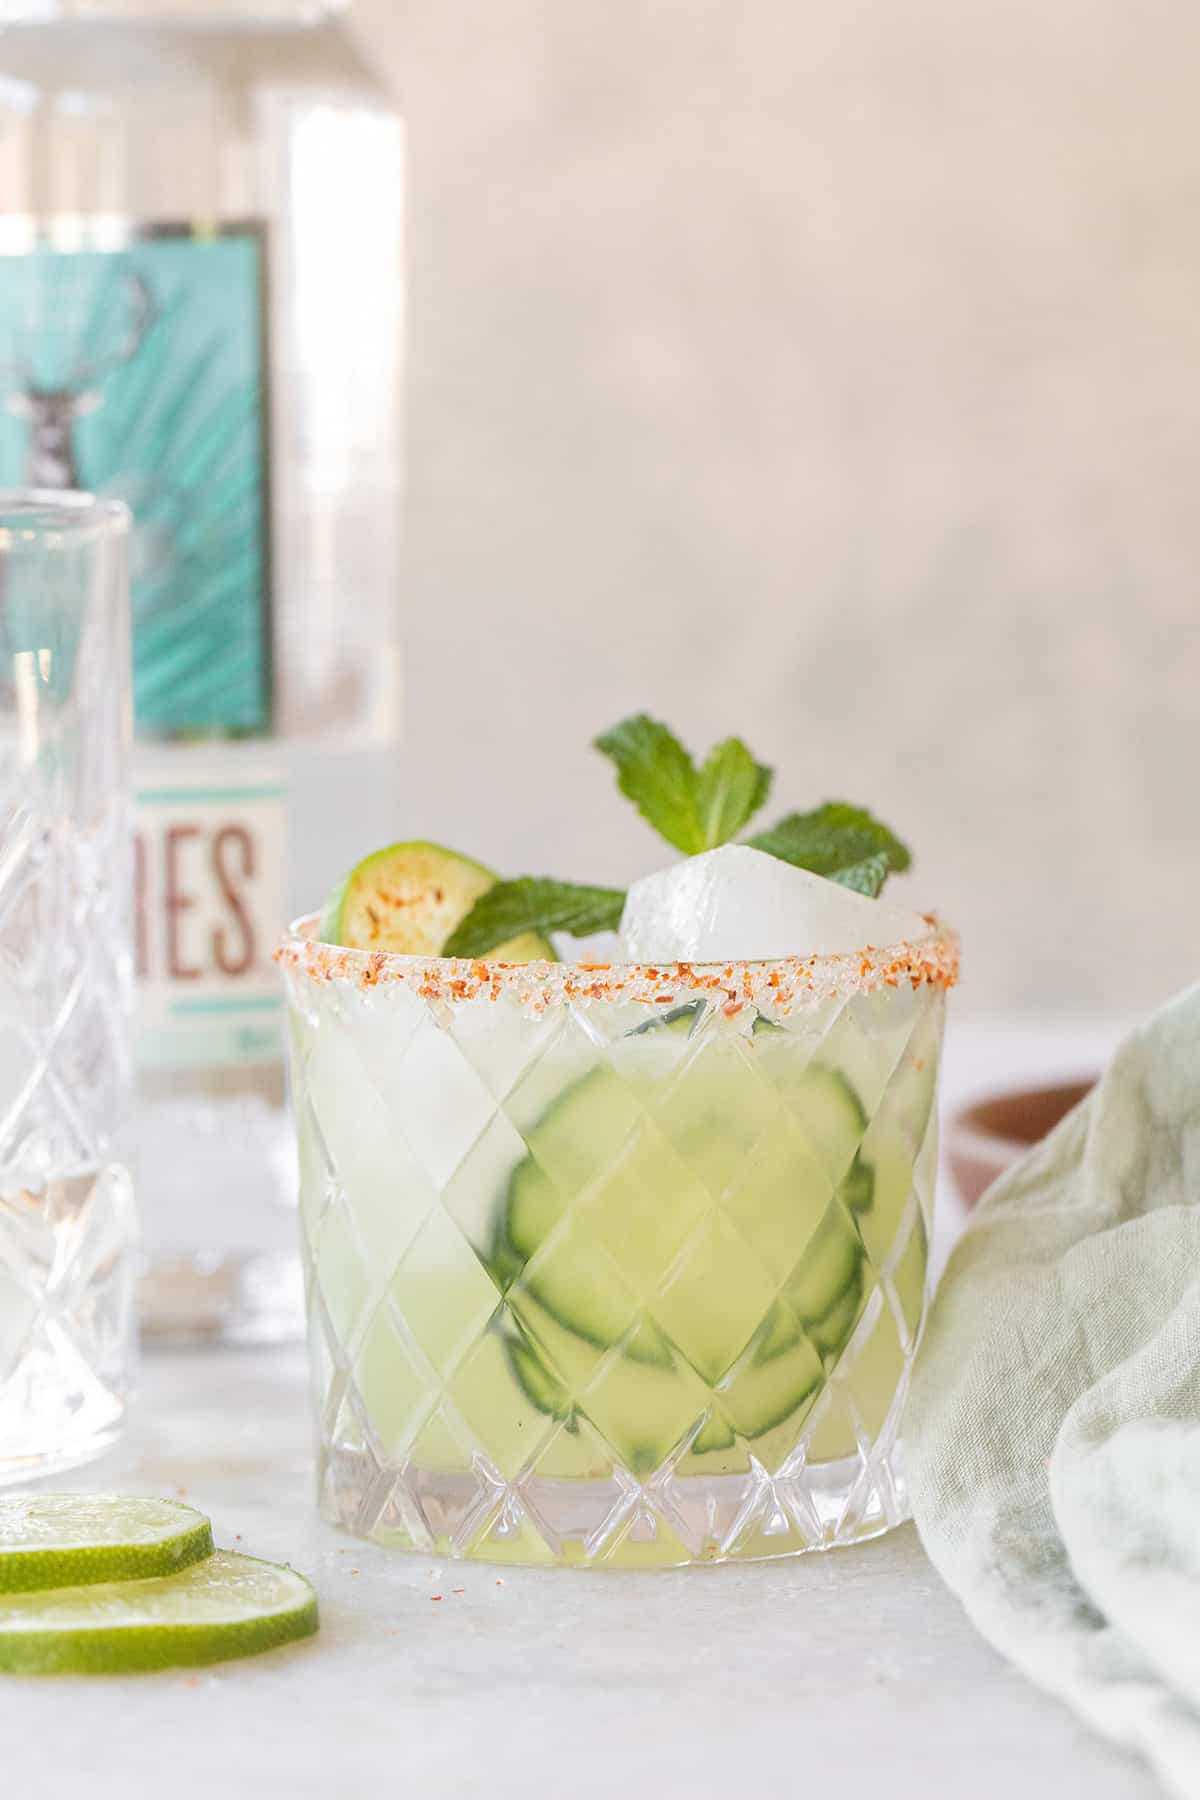 Refreshing margarita with cucumber slices, lime and mint.